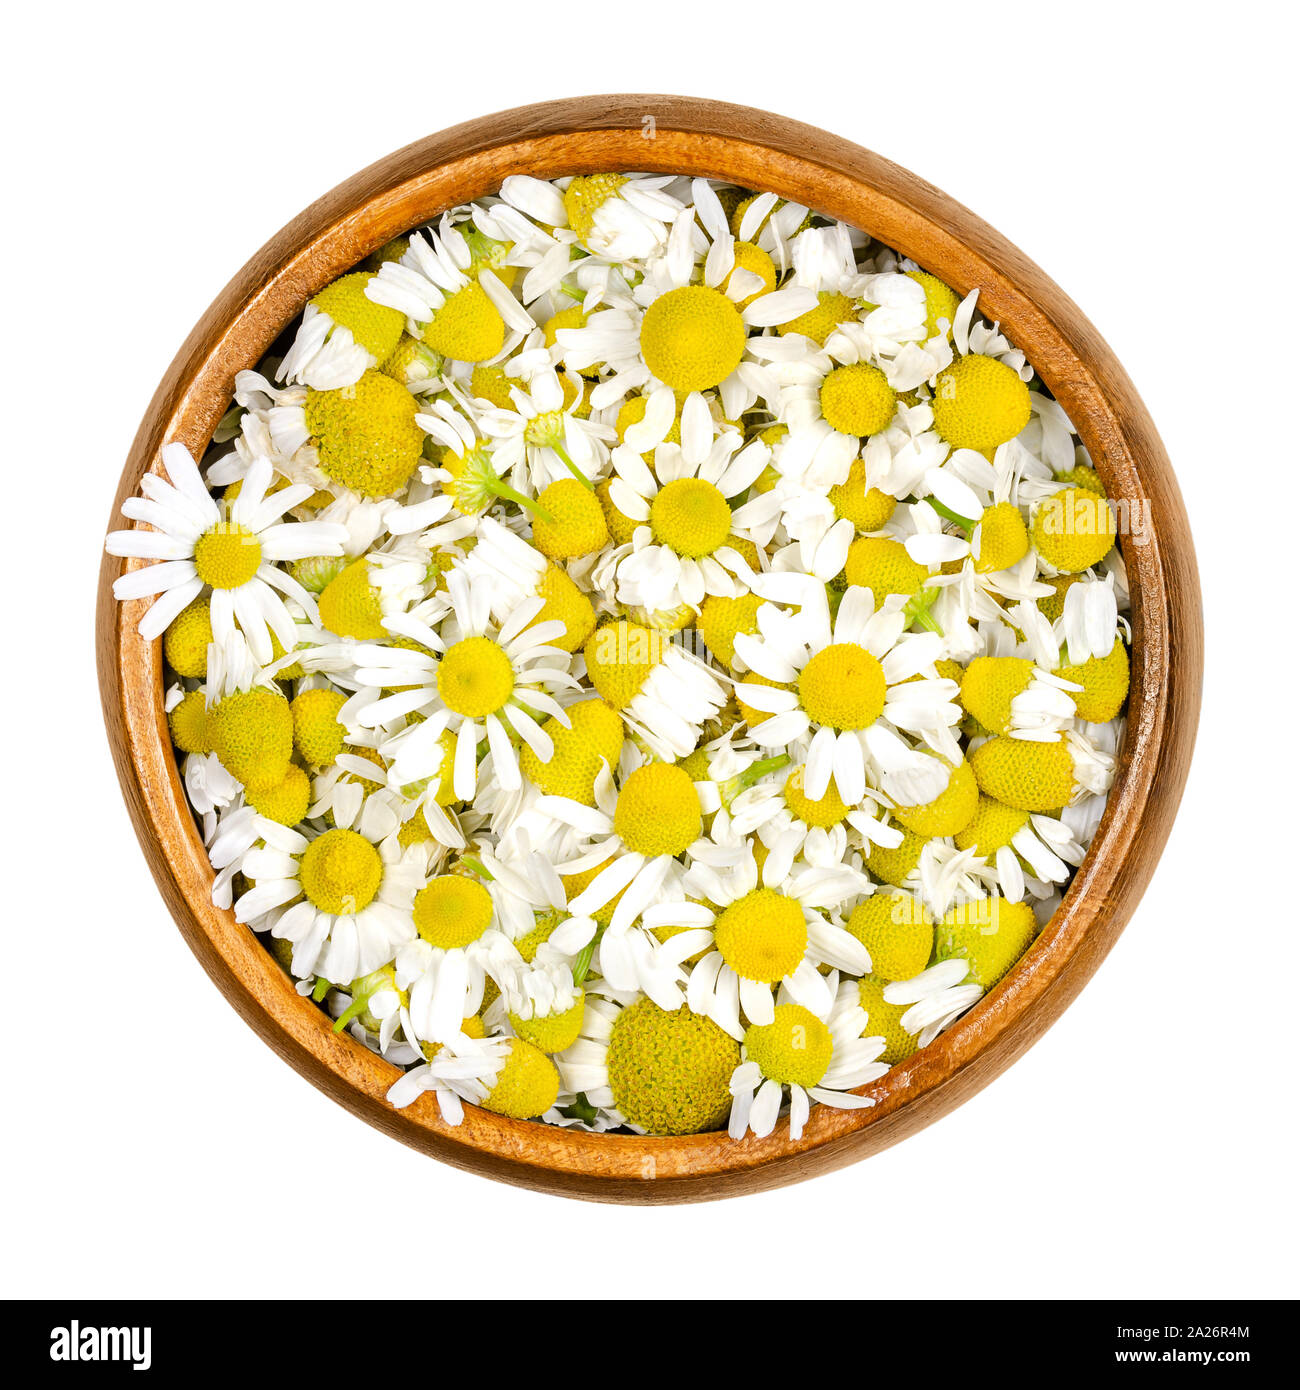 Chamomile blossoms in wooden bowl. Fresh camomile flowers, Matricaria chamomilla, used for herbal infusions and in traditional medicine. Stock Photo